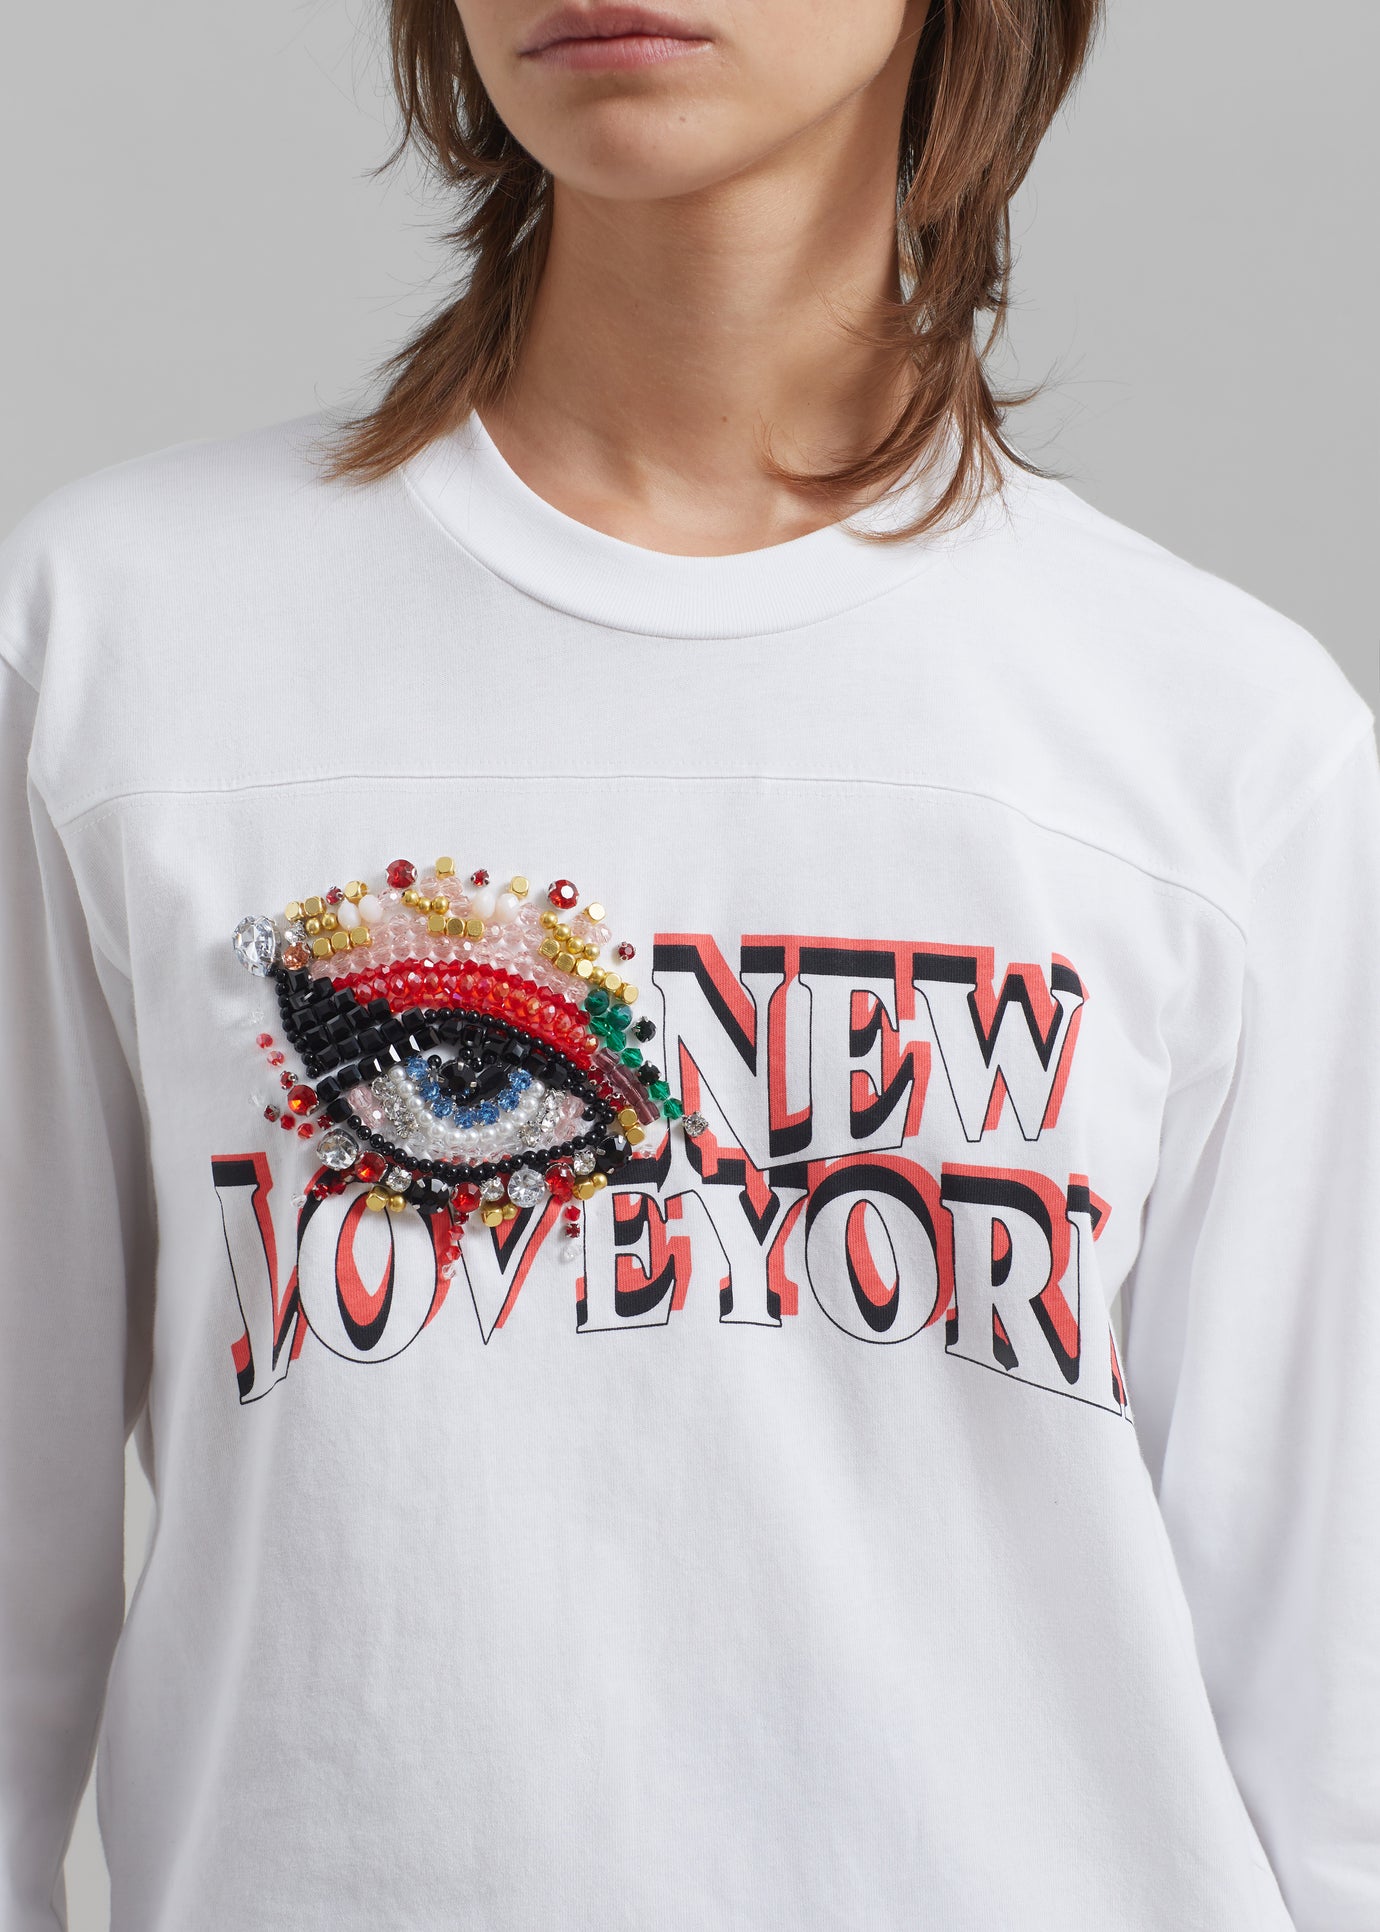 3.1 Phillip Lim Eye Love NY Embroidered Long Sleeve Relaxed Tee - White - 1